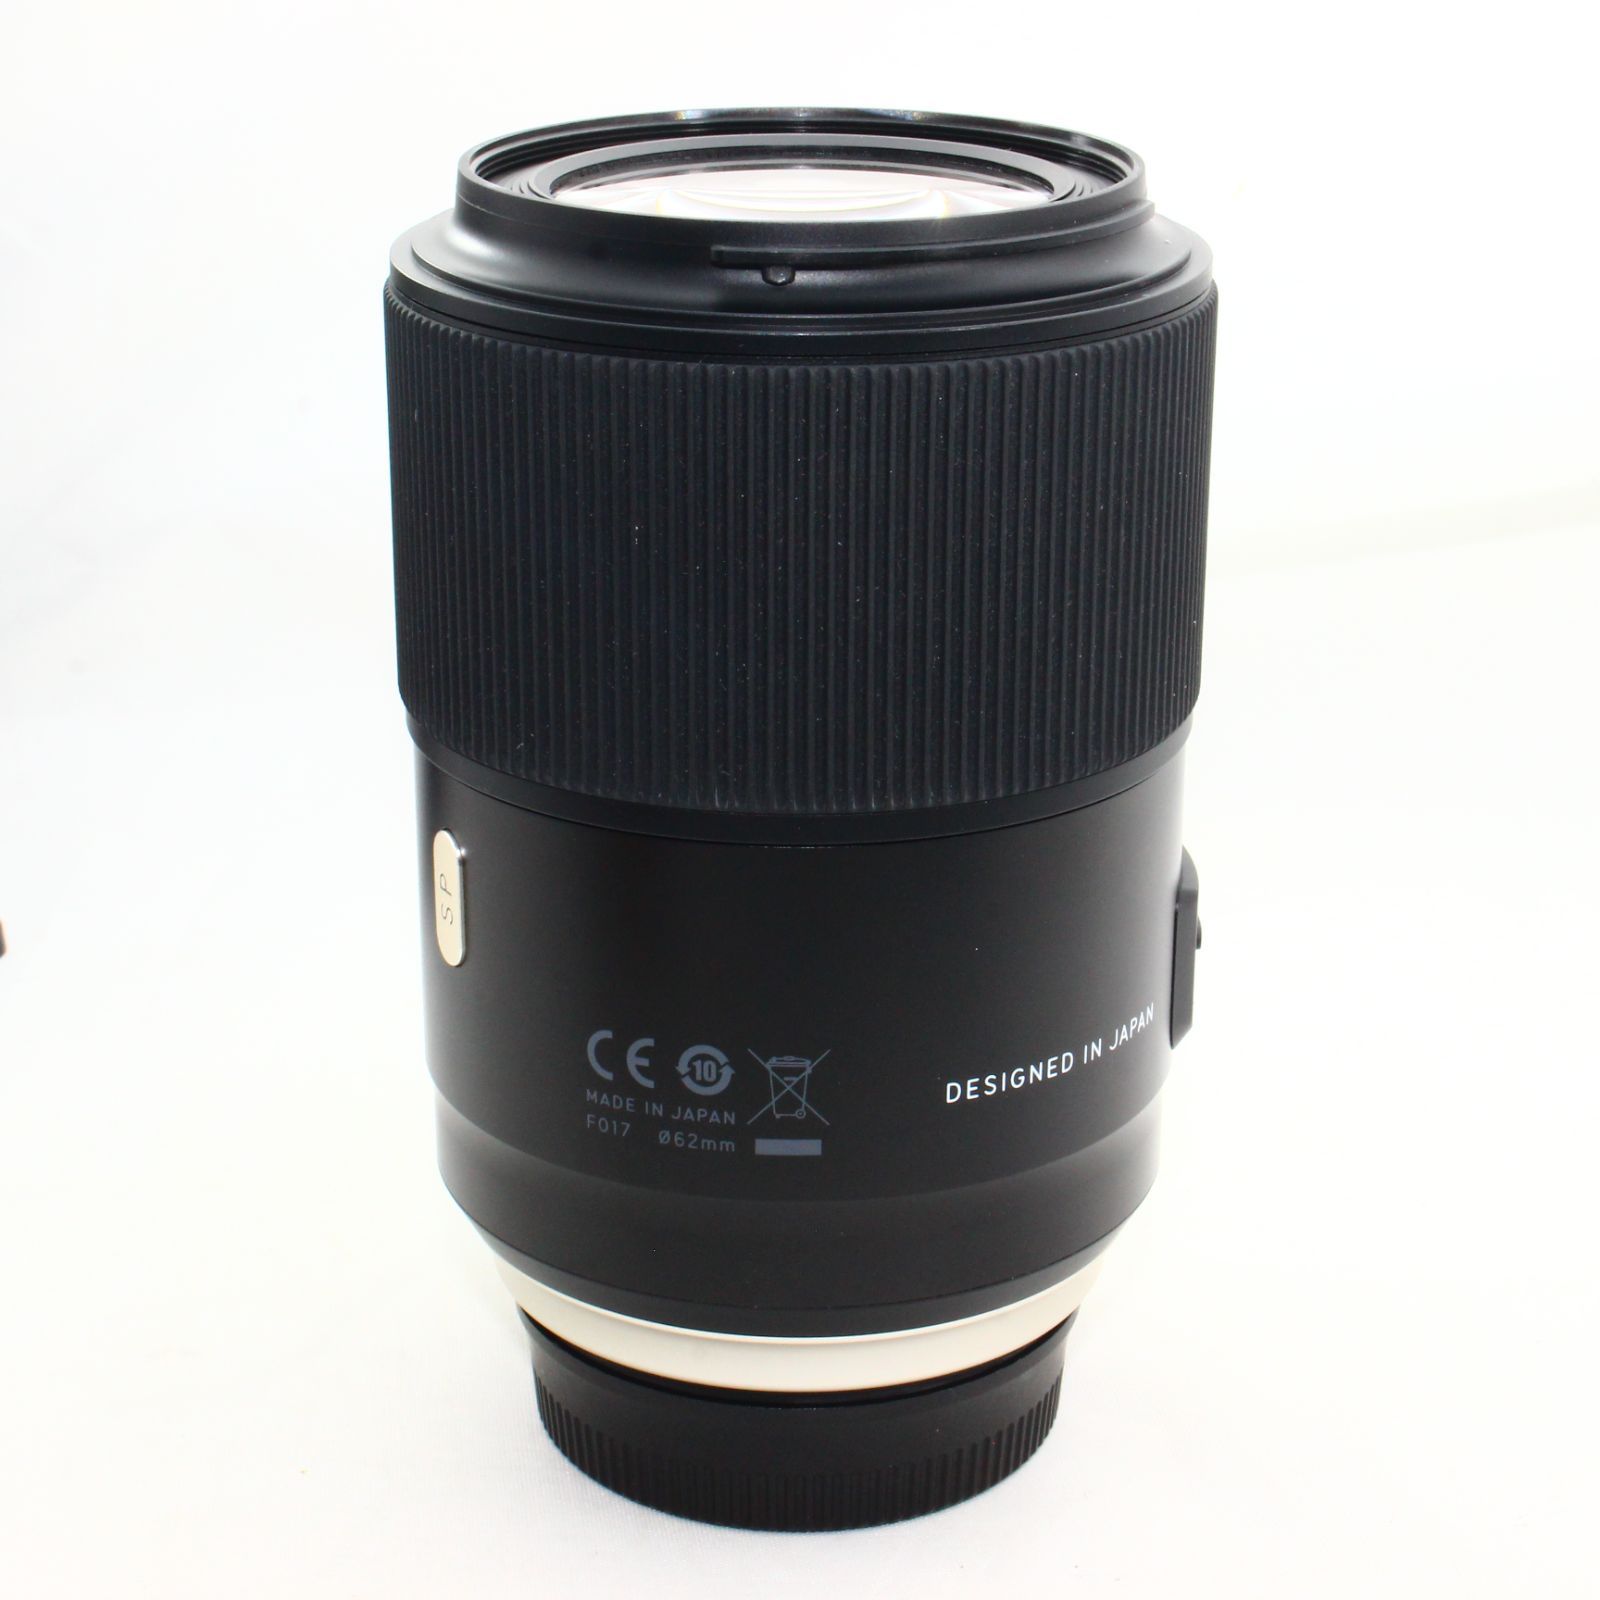 TAMRON 単焦点マクロレンズ SP90mm F2.8 Di MACRO 1:1 VC USD ニコン用